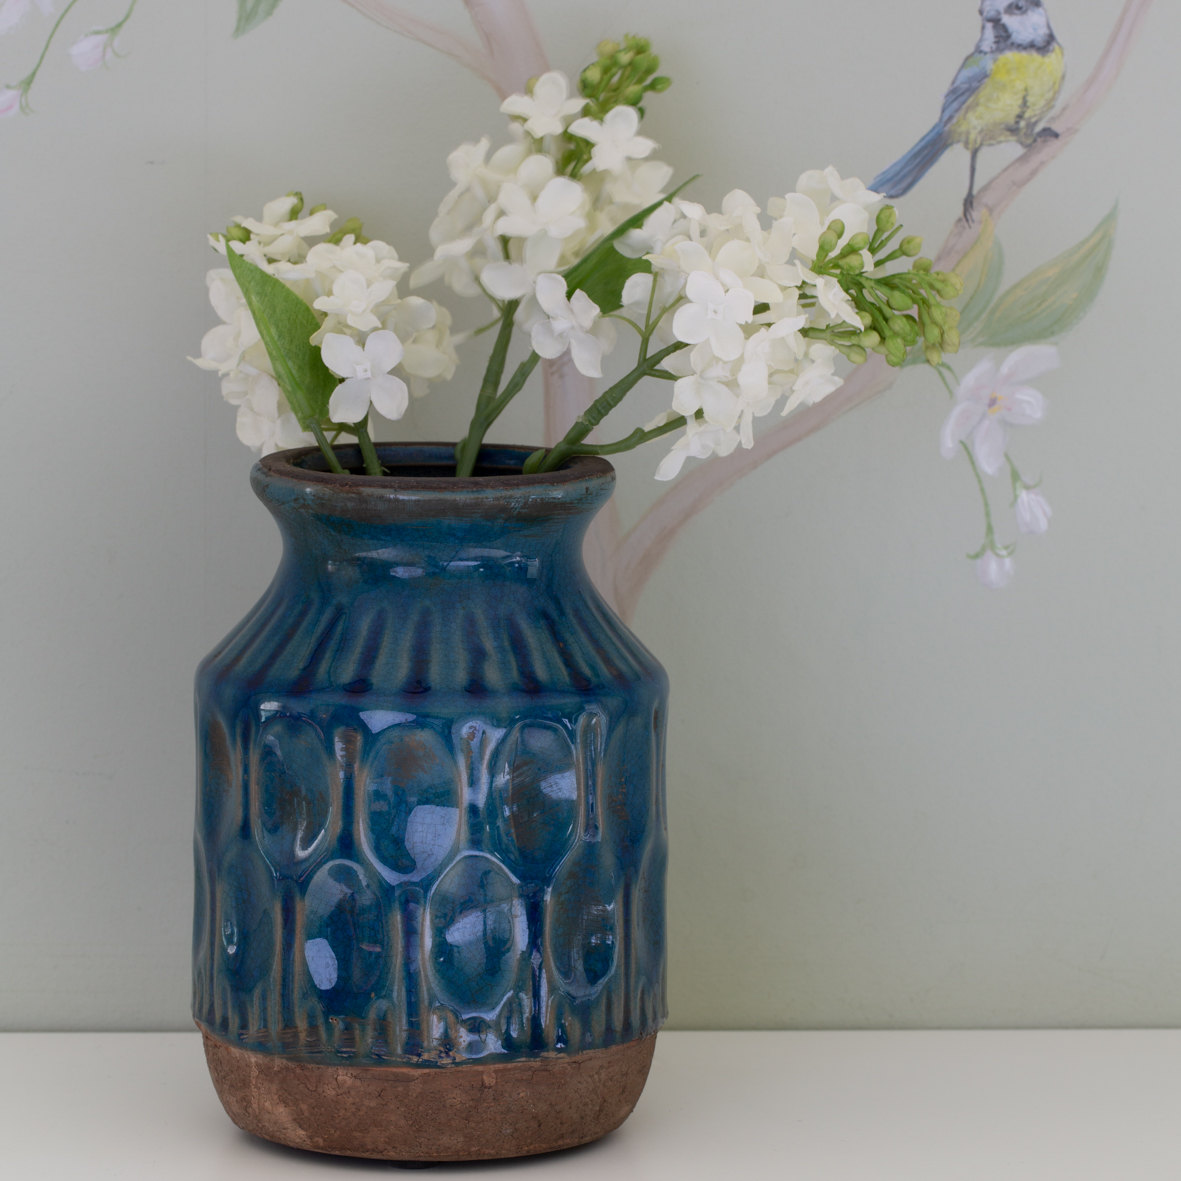 NEW! Small Peacock Blue Vase